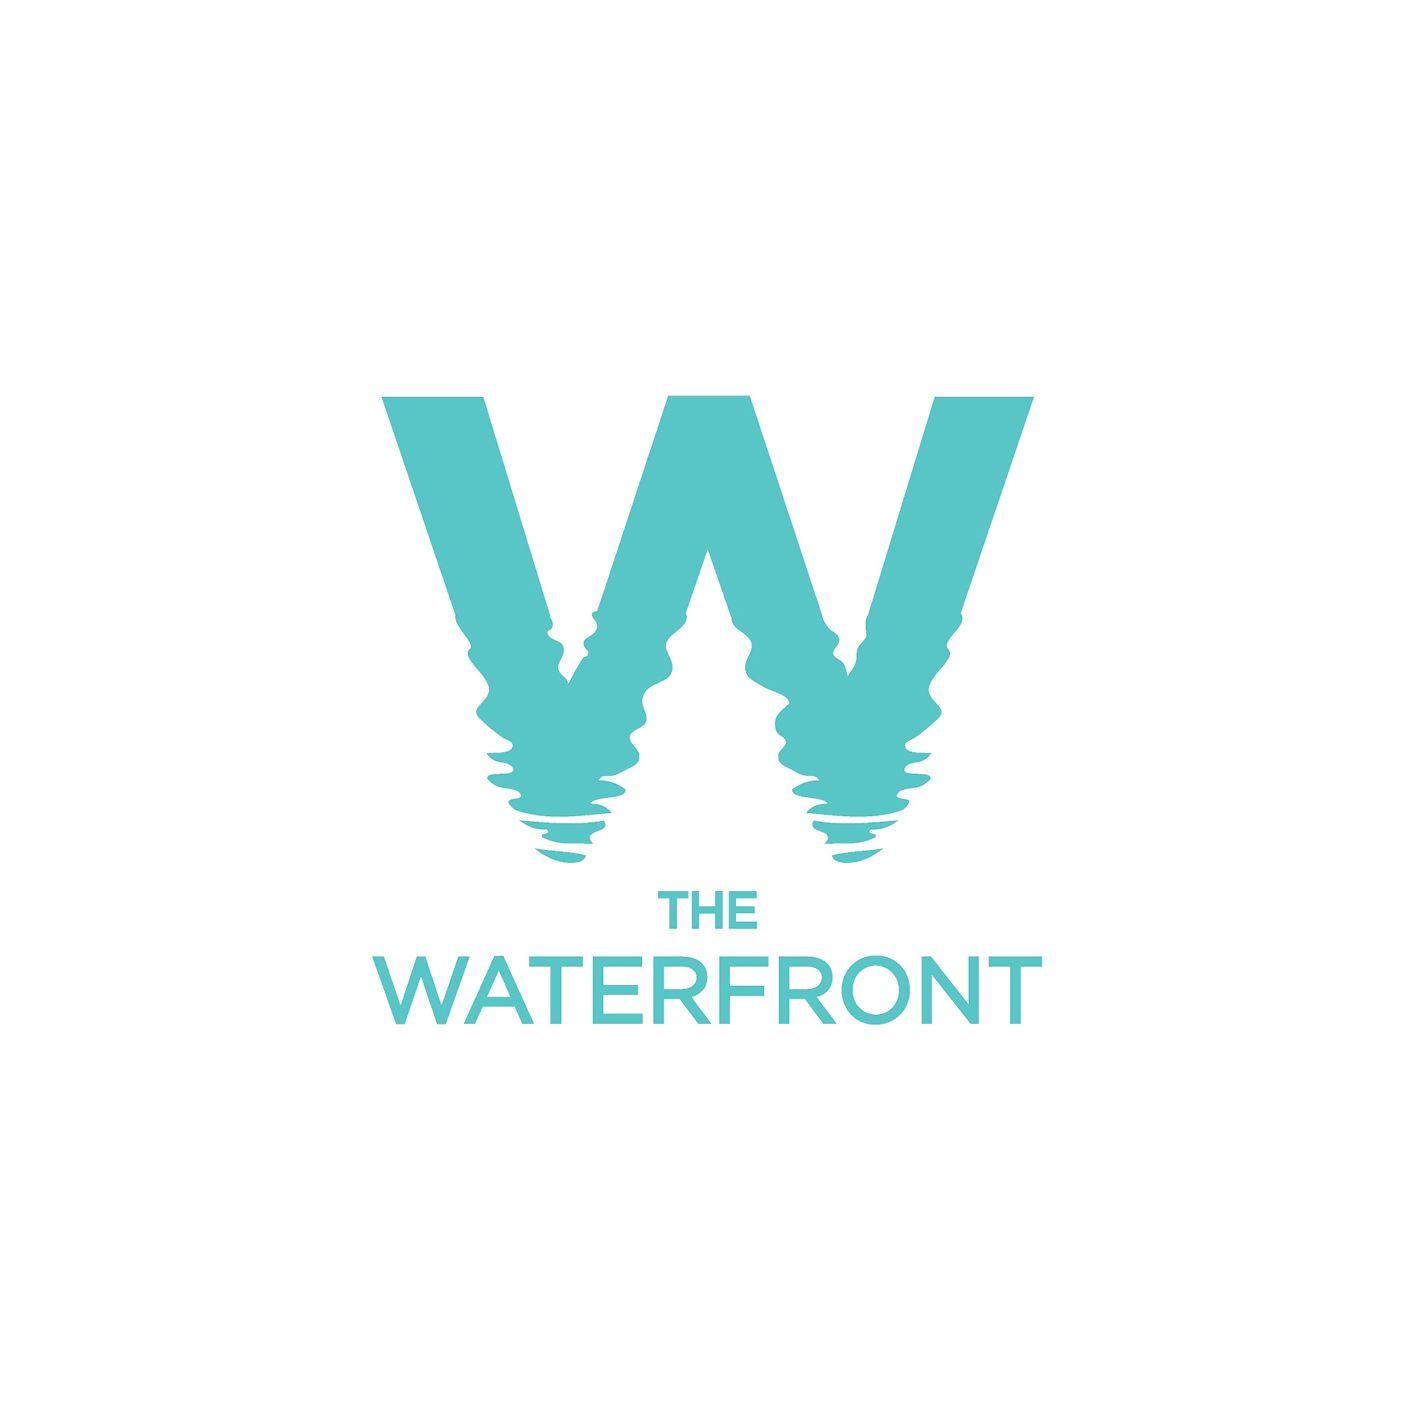 Abstract Water Logo - Given that water is such an important element of your work, thoughts